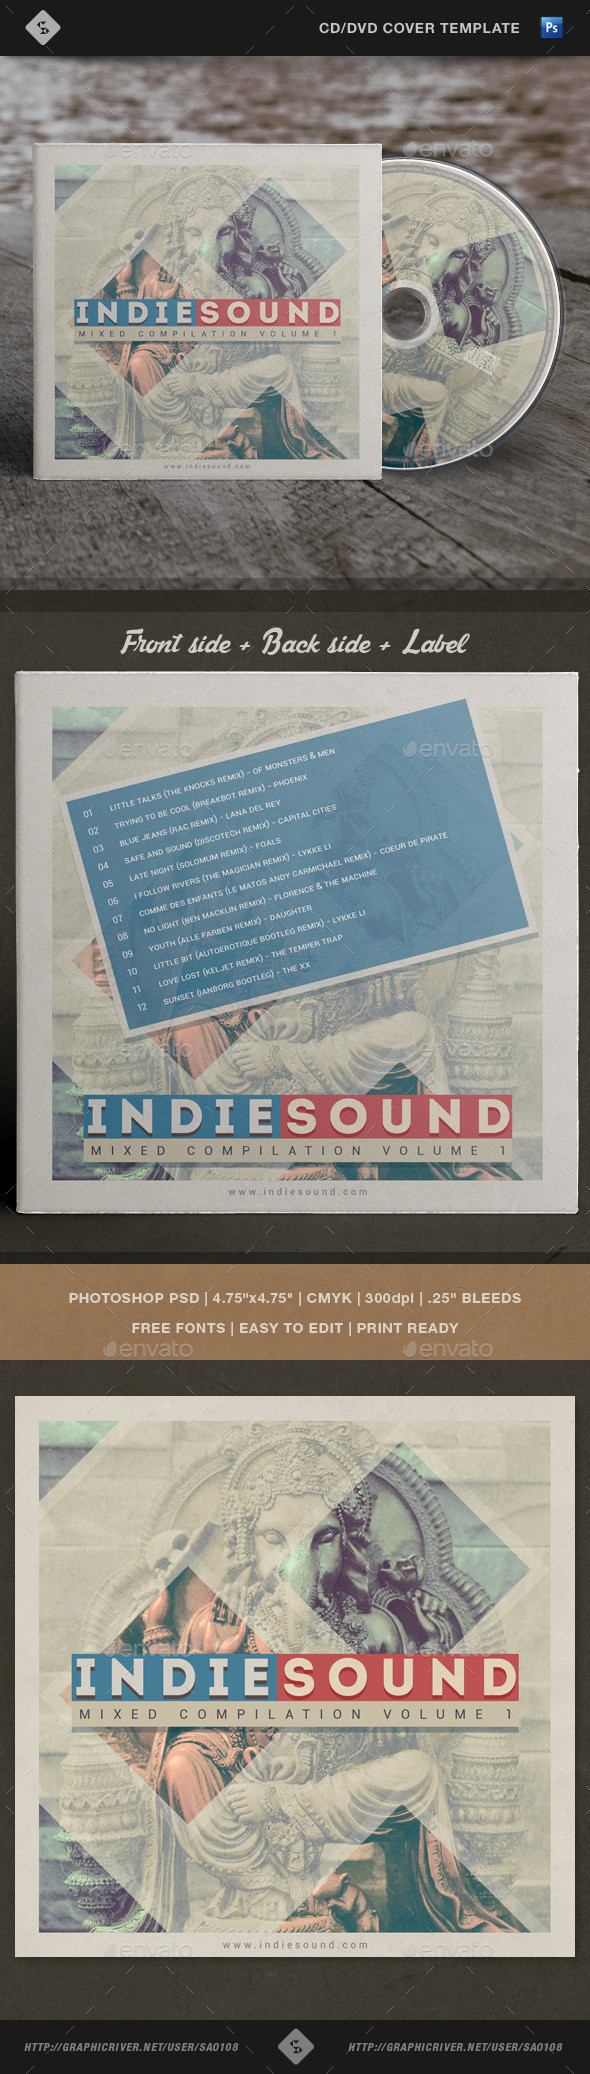 Indiesound cd cover template preview